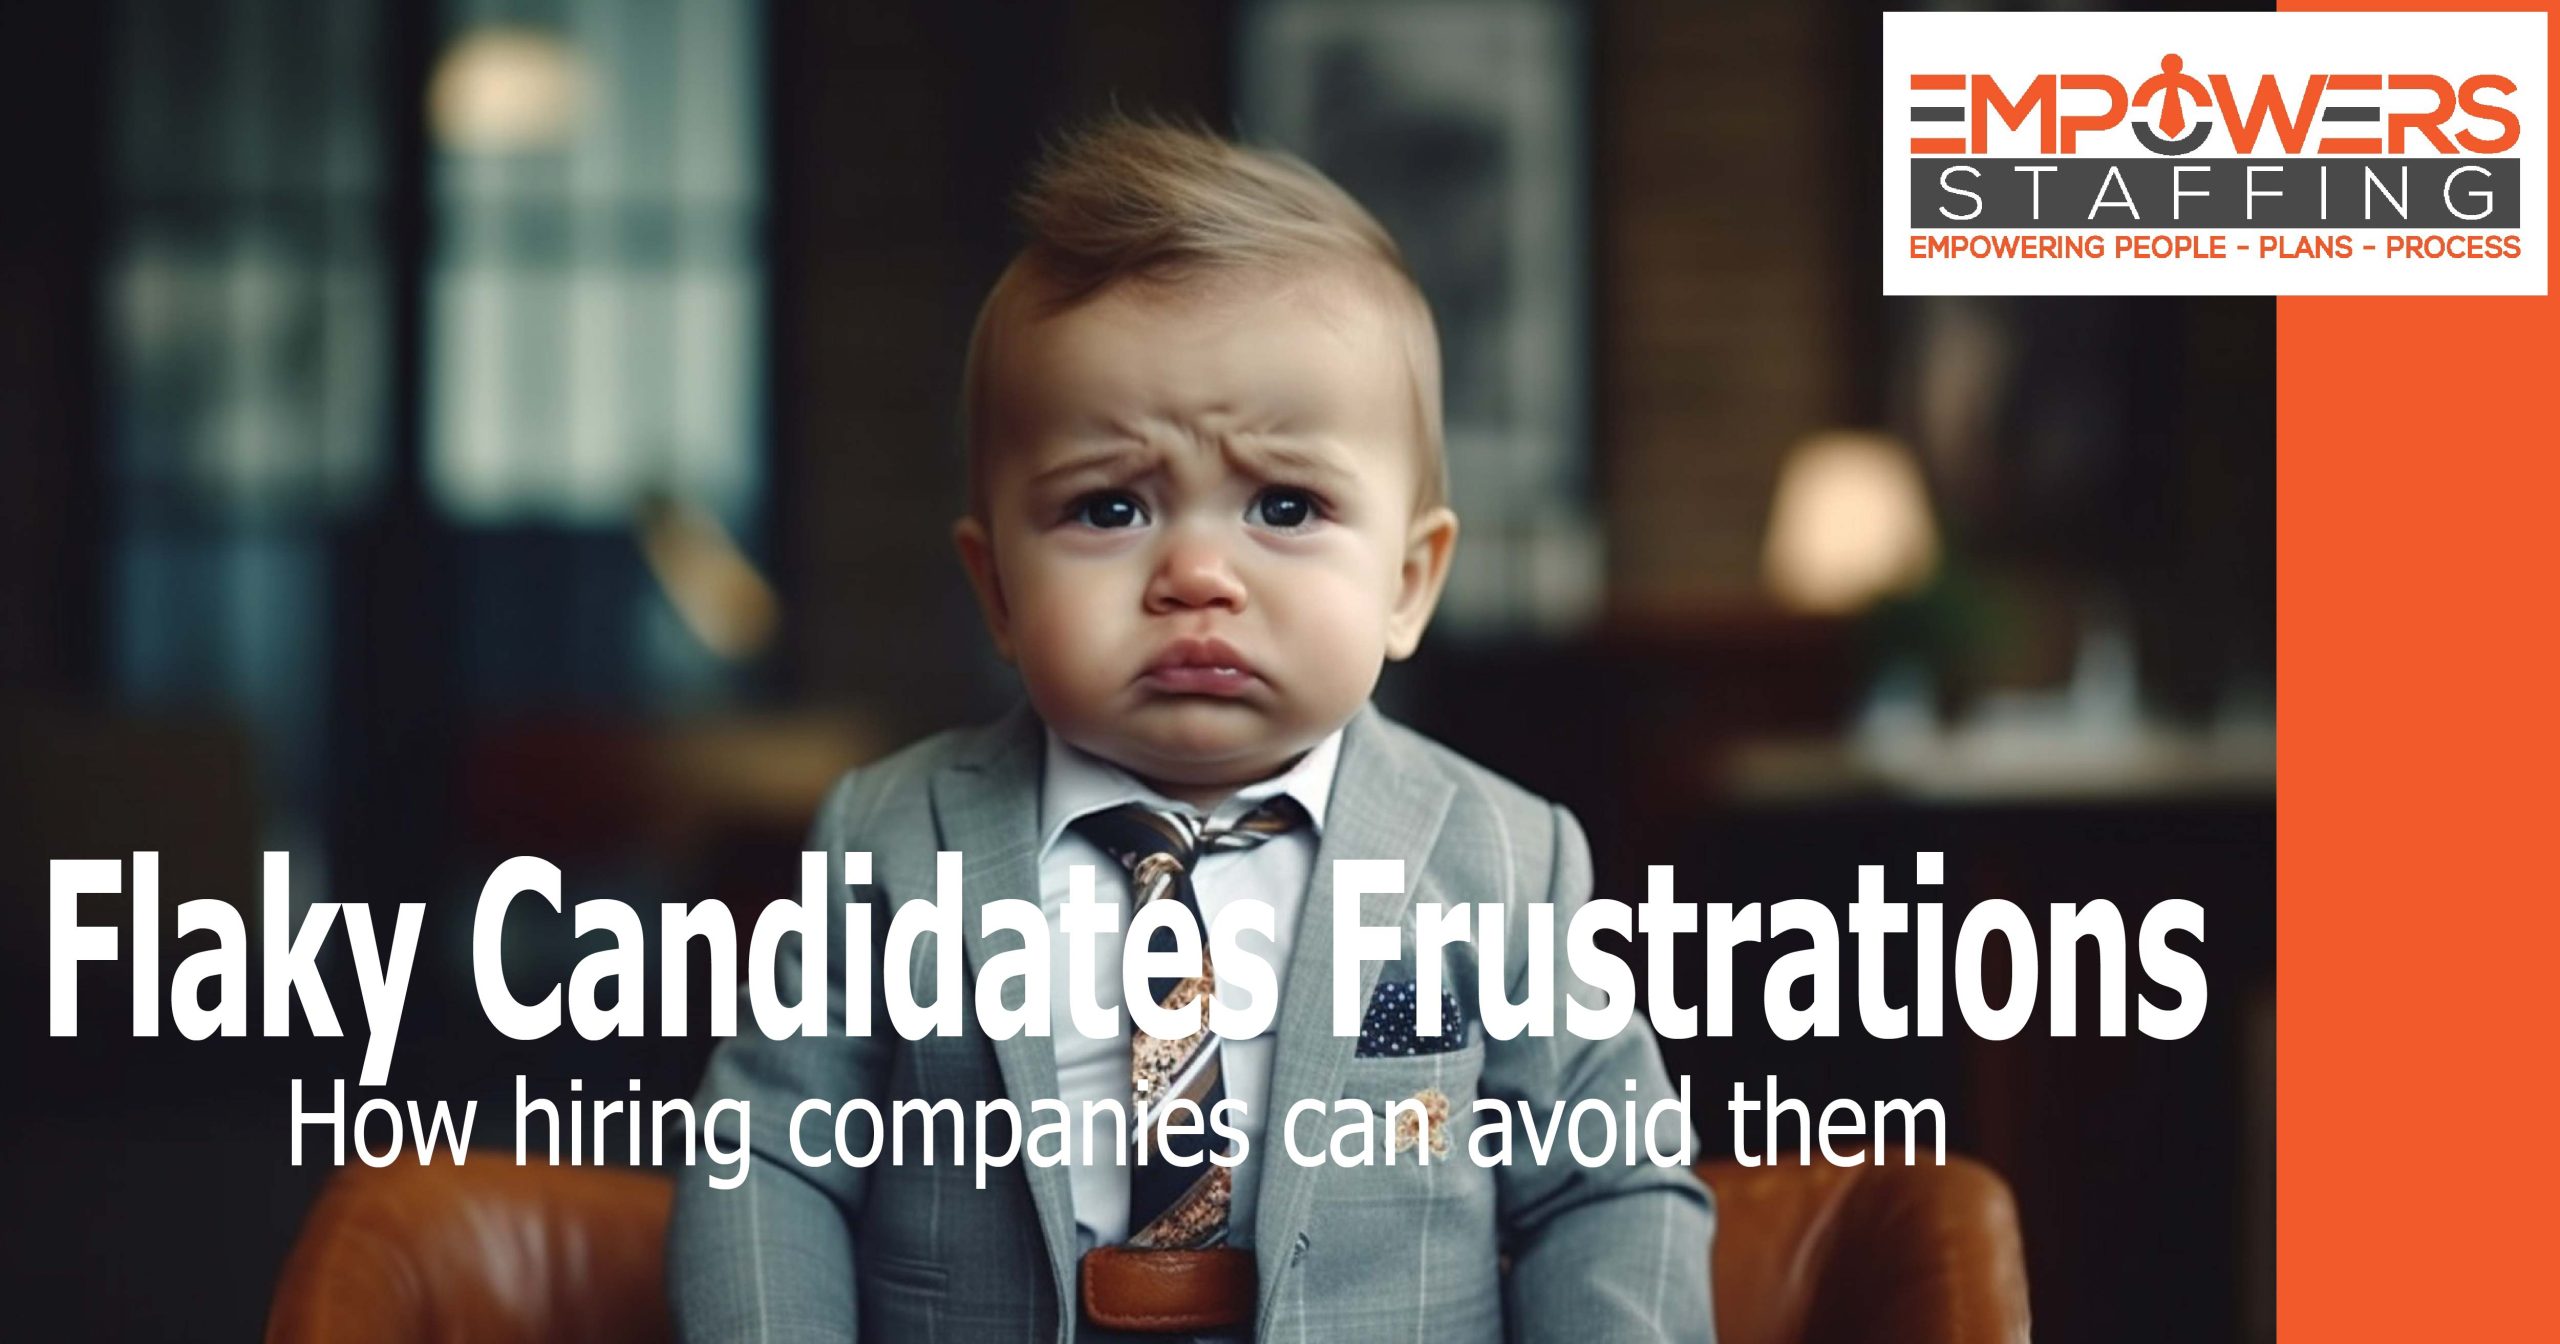 A picture of a frustrated toddler dressed in a suit and tie posing as a boss.